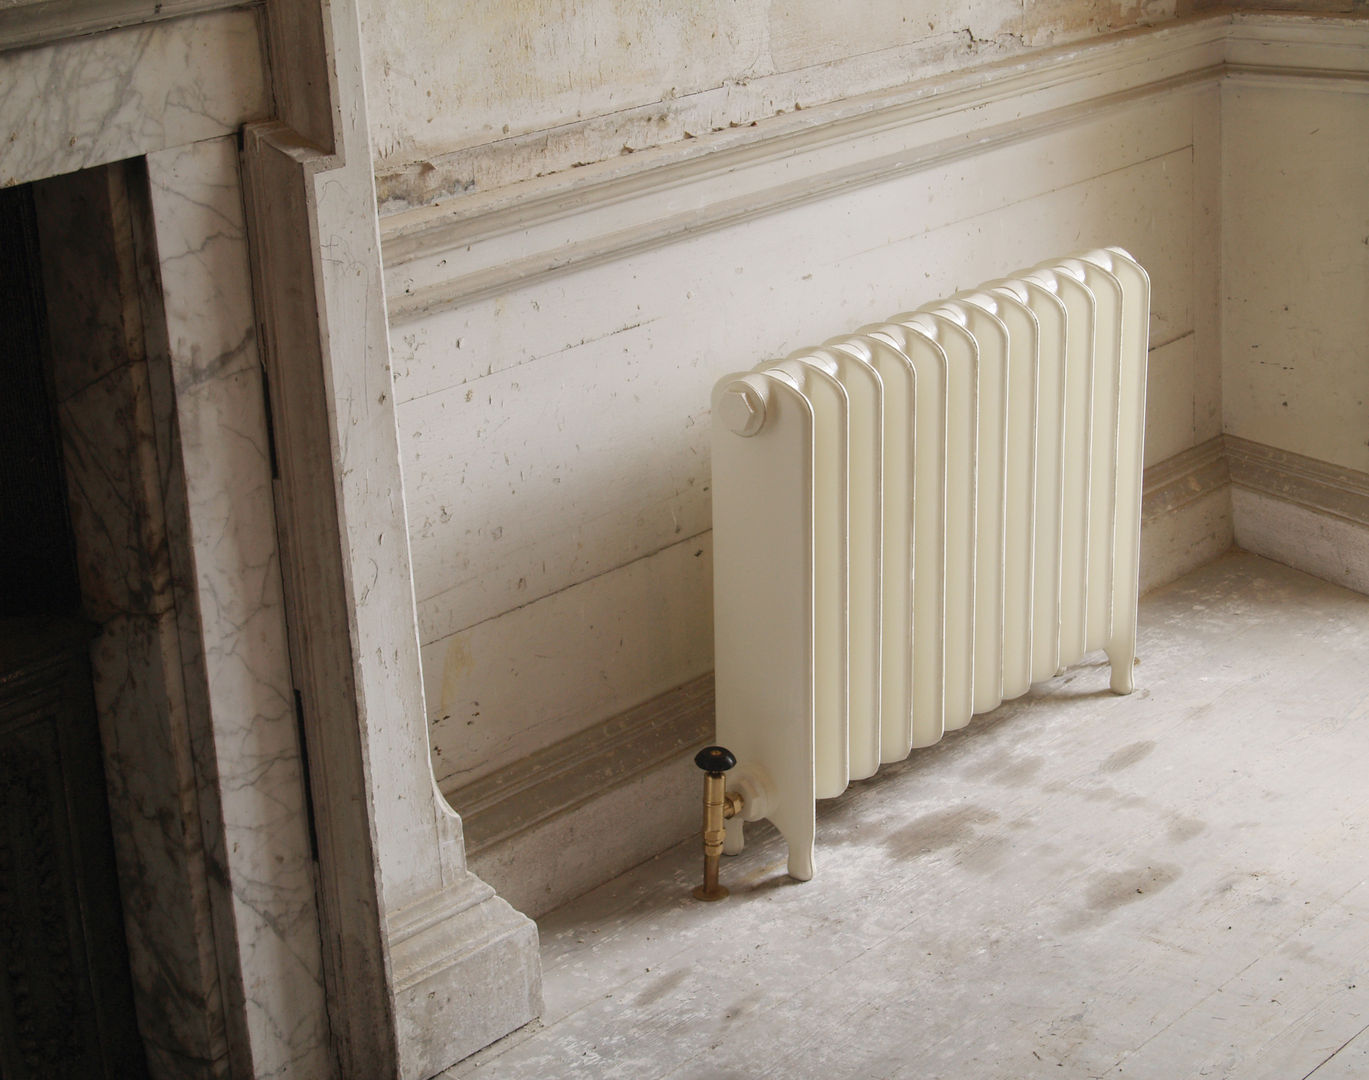 The Eton Cast Iron Radiator is available from UKAA UKAA | UK Architectural Antiques Salle de bain classique Robinets